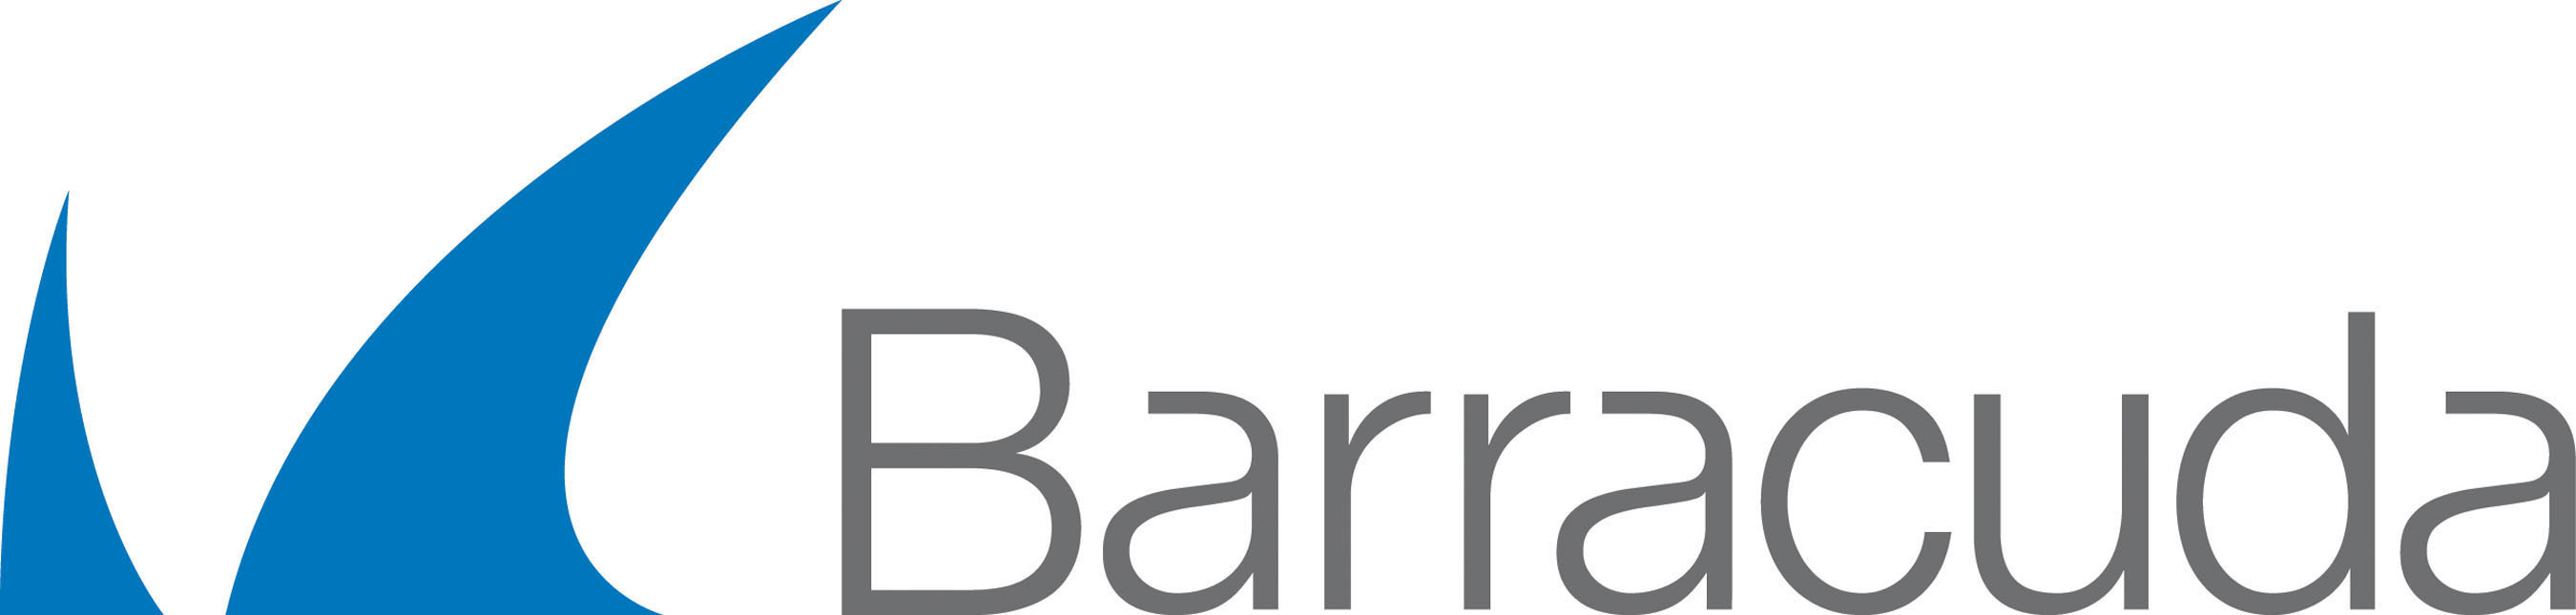 Barracuda Mounting Rail Kit for Network Security & Firewall Device